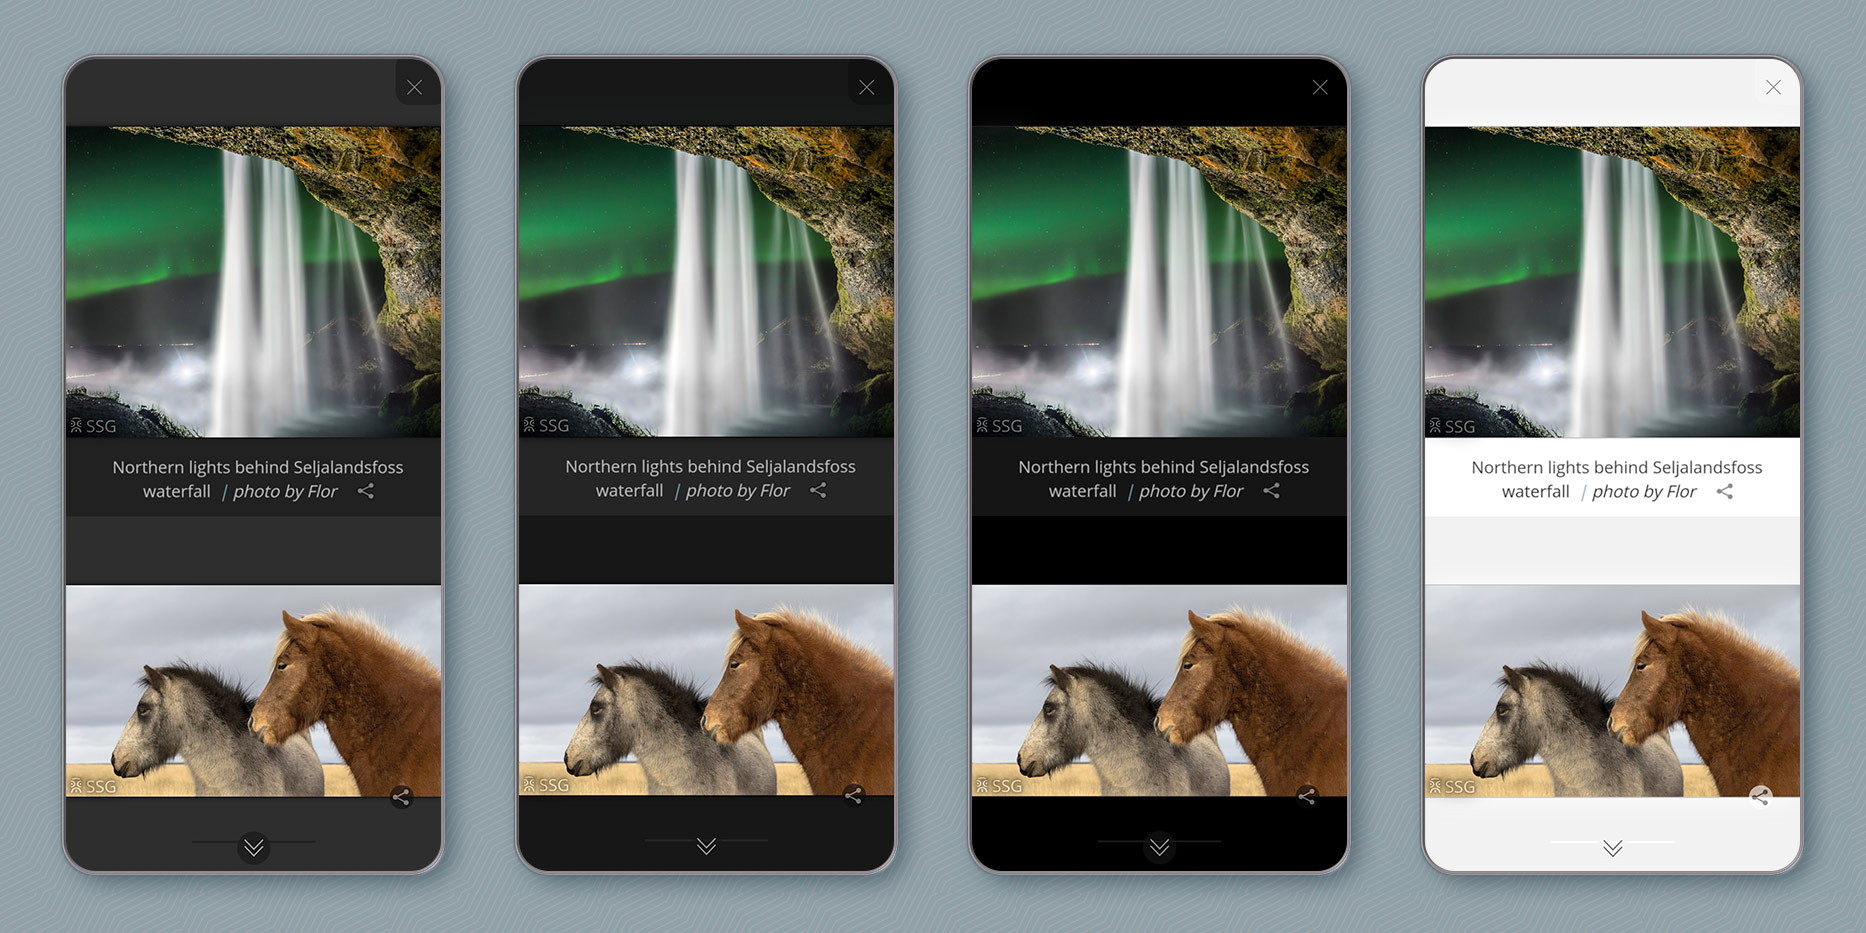 Story Show Gallery on smartphones in portrait mode. There are four color themes